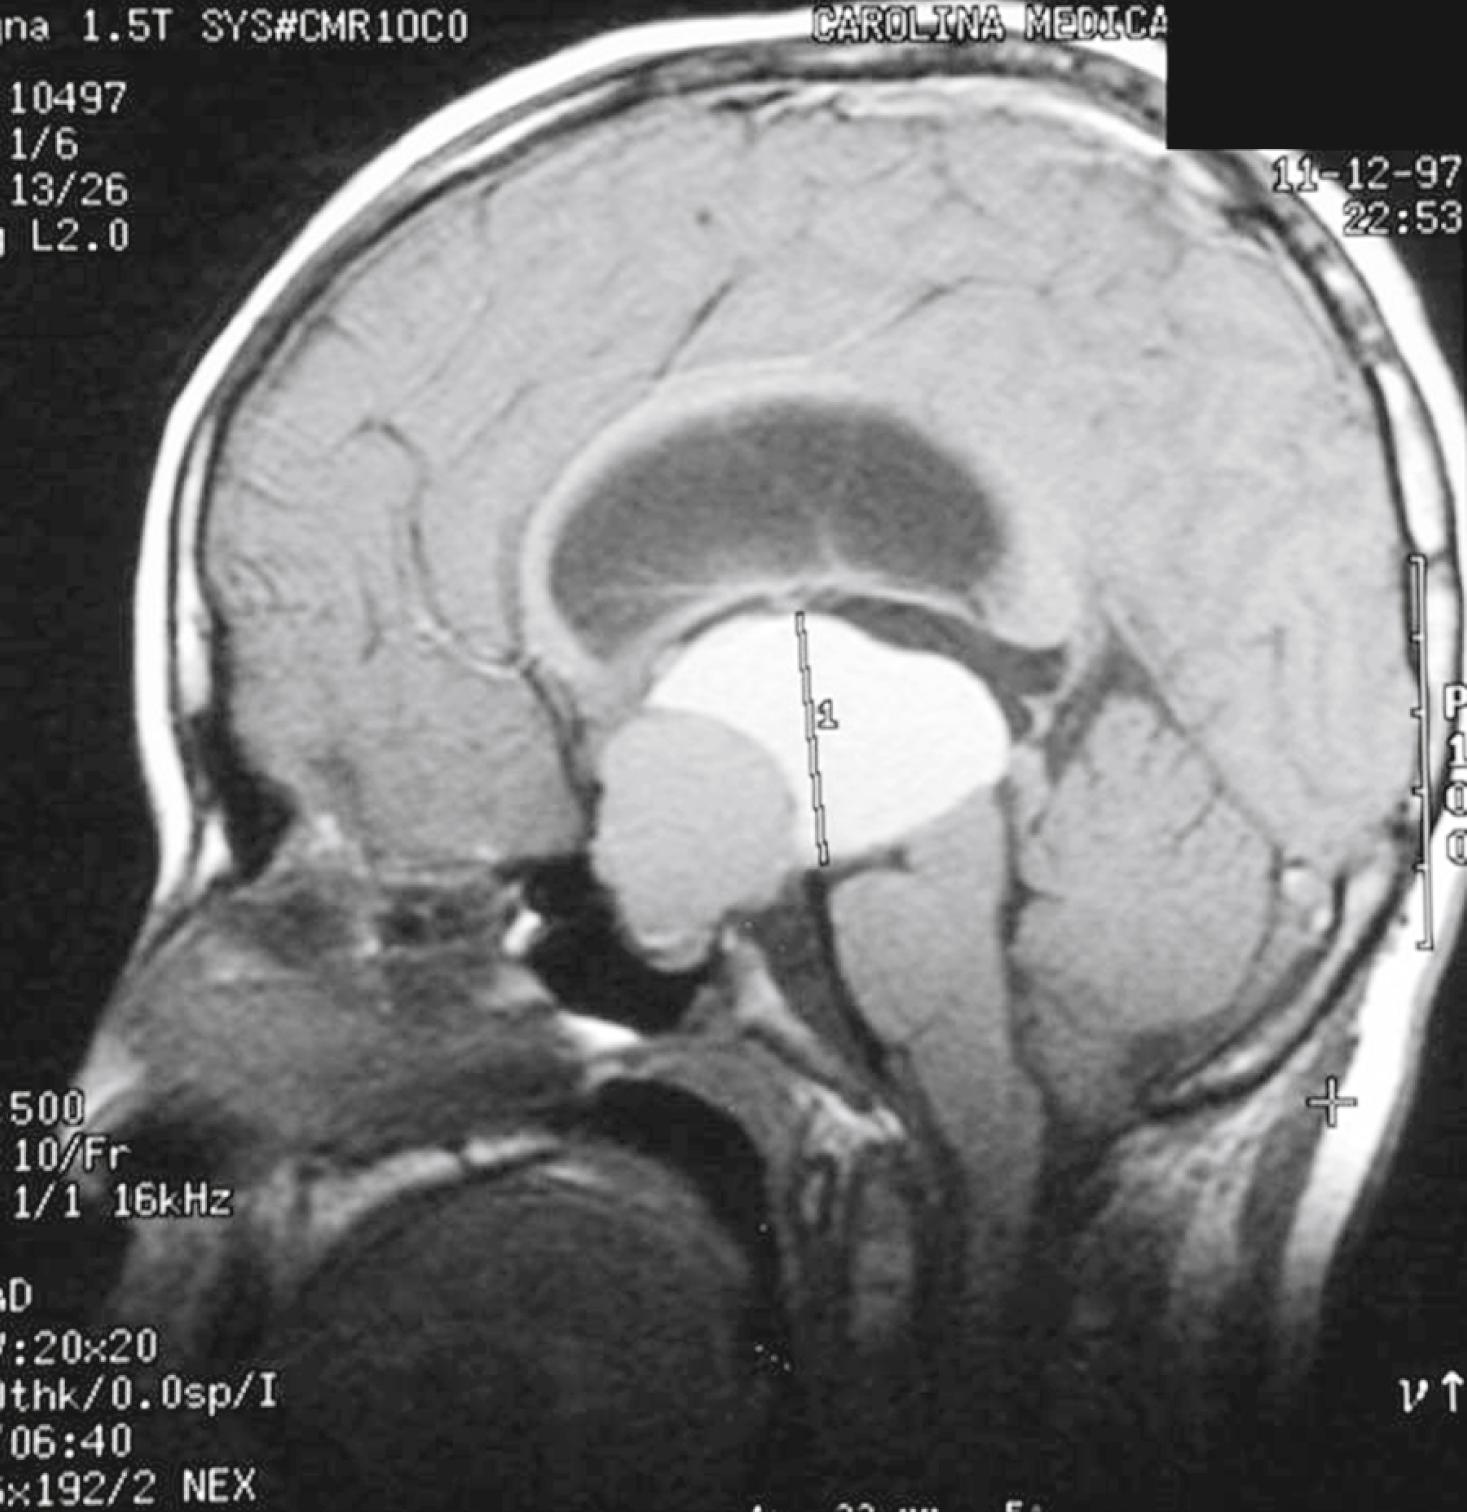 Fig. 9.16, Craniopharyngioma. Heterogeneous, densely enhancing suprasellar mass extending from the pituitary fossa into the hypothalamus and third ventricle.